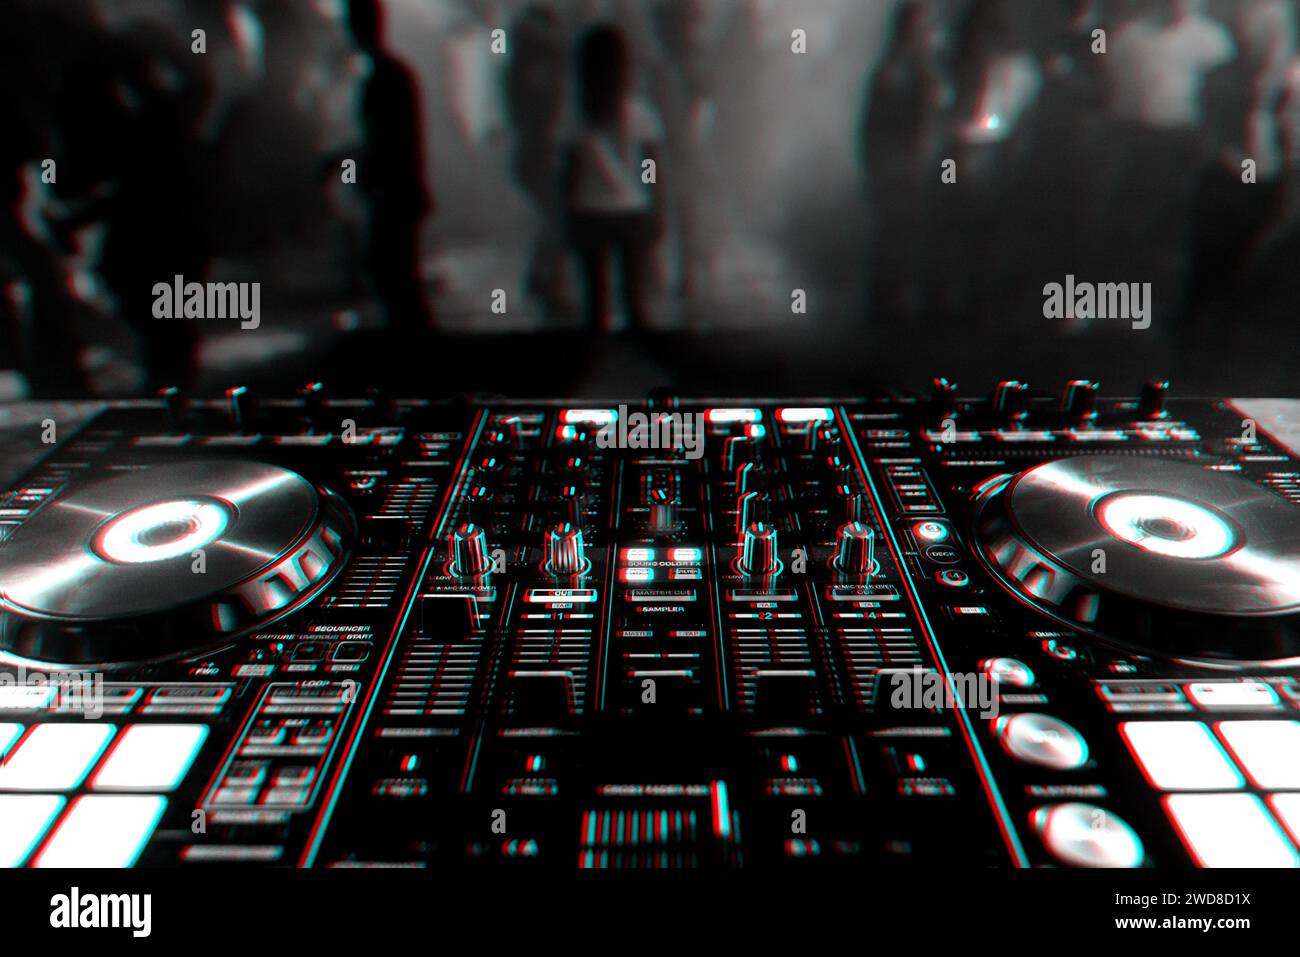 DJ mixer controller Board for professional mixing of electronic music in a nightclub at a party with dancing people in the background. Black and white Stock Photo